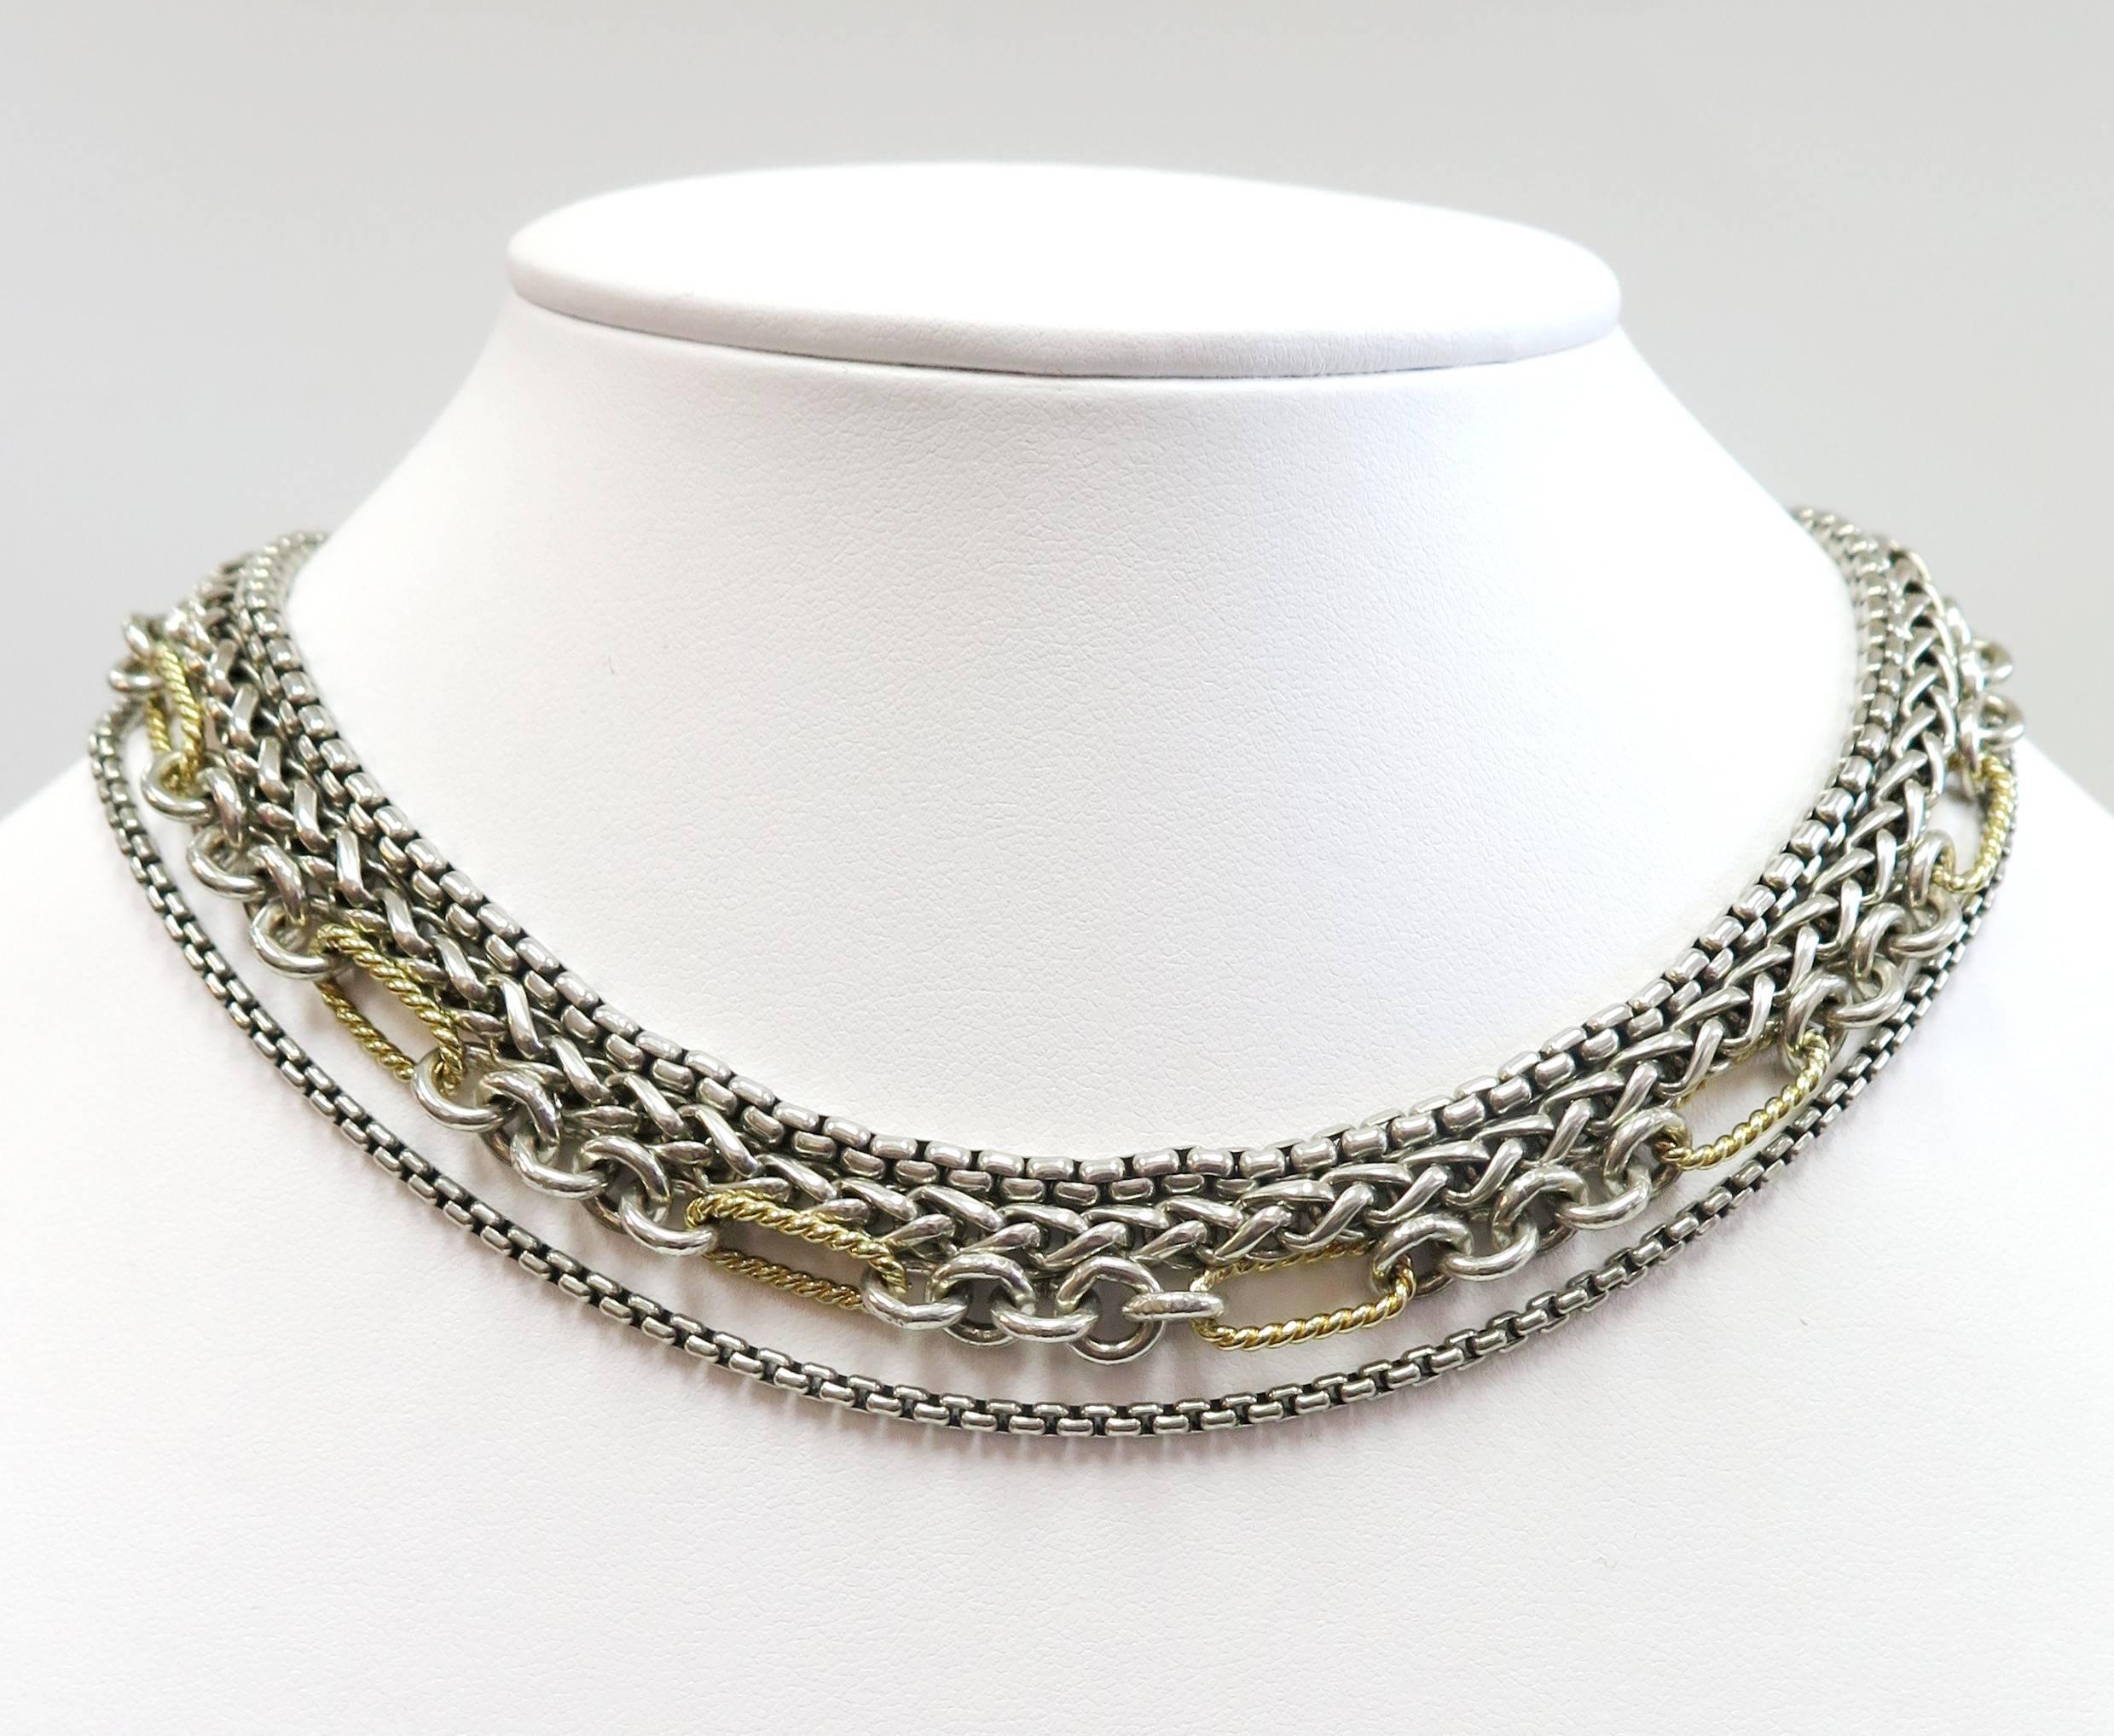 Contemporary Estate David Yurman Sterling Silver and 18 Karat Layered Chain Necklace